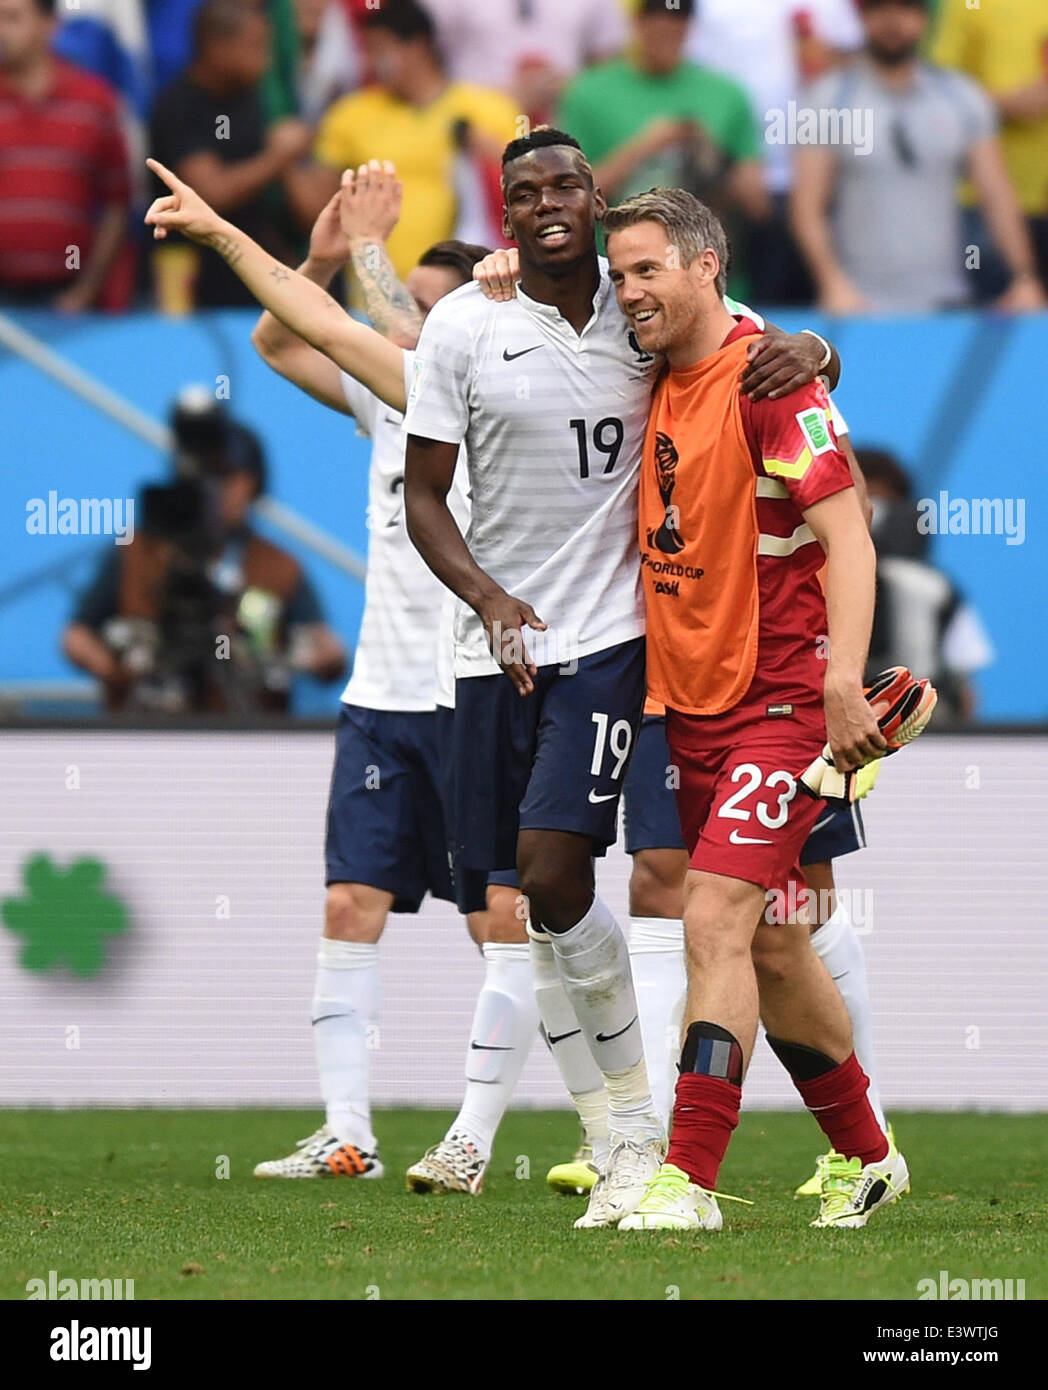 Brasilia, Brazil. 30th June, 2014. Paul Pogba (L) and goalkeeper Mickael Landreau of France celebrate after the FIFA World Cup 2014 round of 16 match between France and Nigeria at the Estadio National Stadium in Brasilia, Brazil, on 30 June 2014. Credit:  dpa picture alliance/Alamy Live News Stock Photo